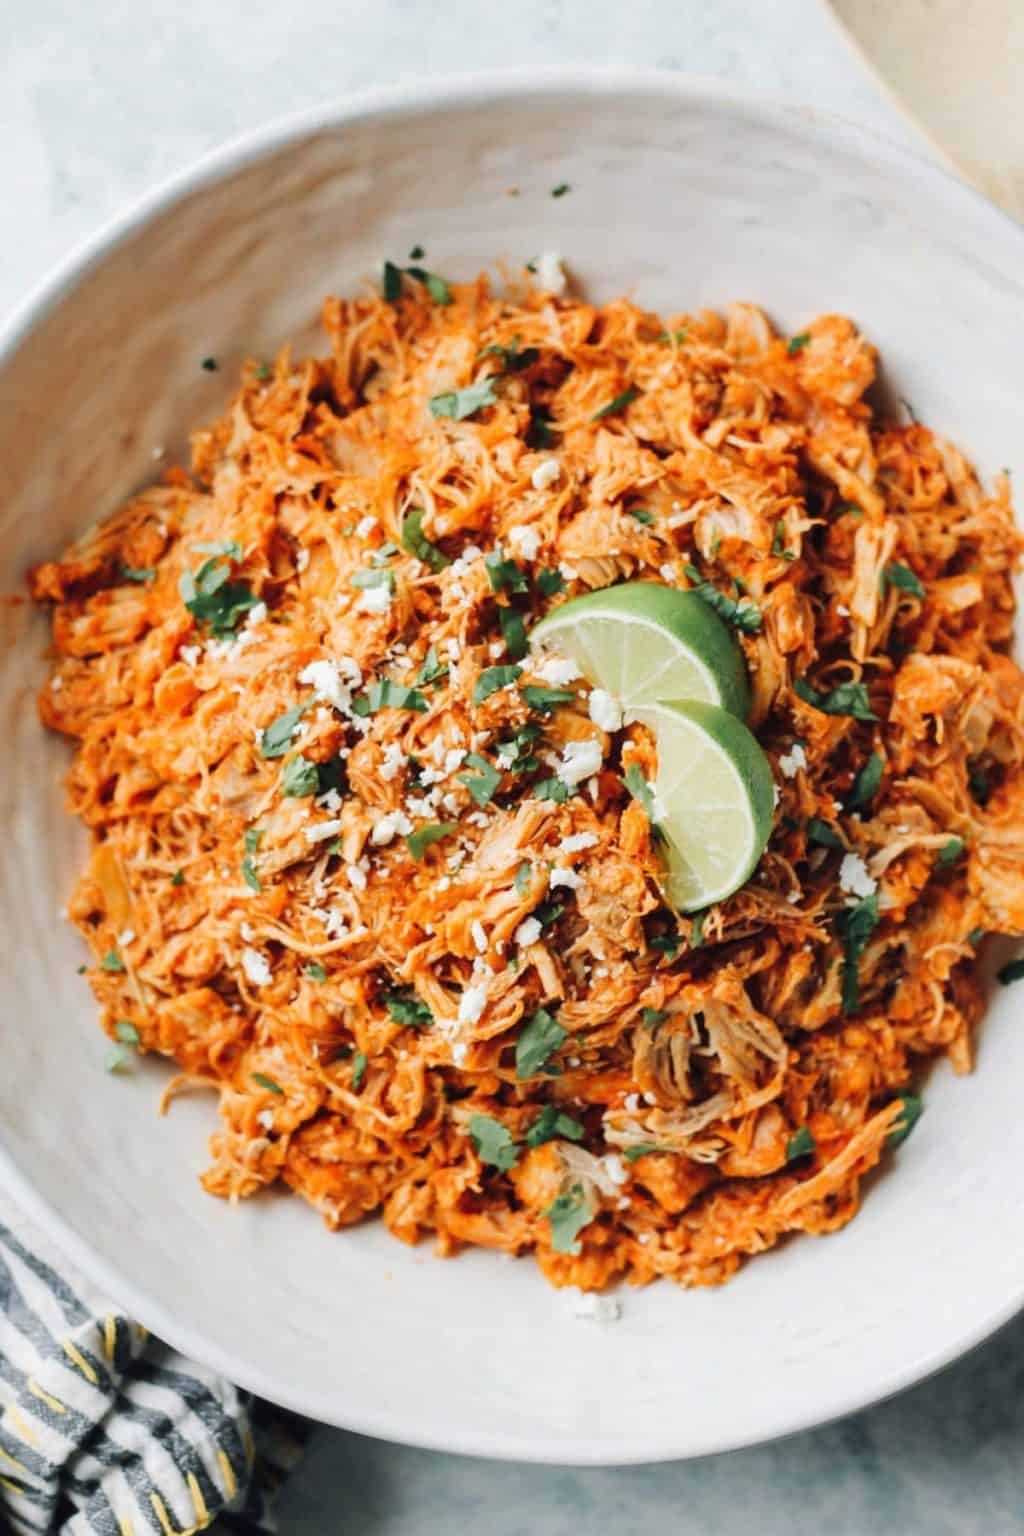 Chicken Tinga Recipe - Easy Chicken Recipes (HOW TO VIDEO)